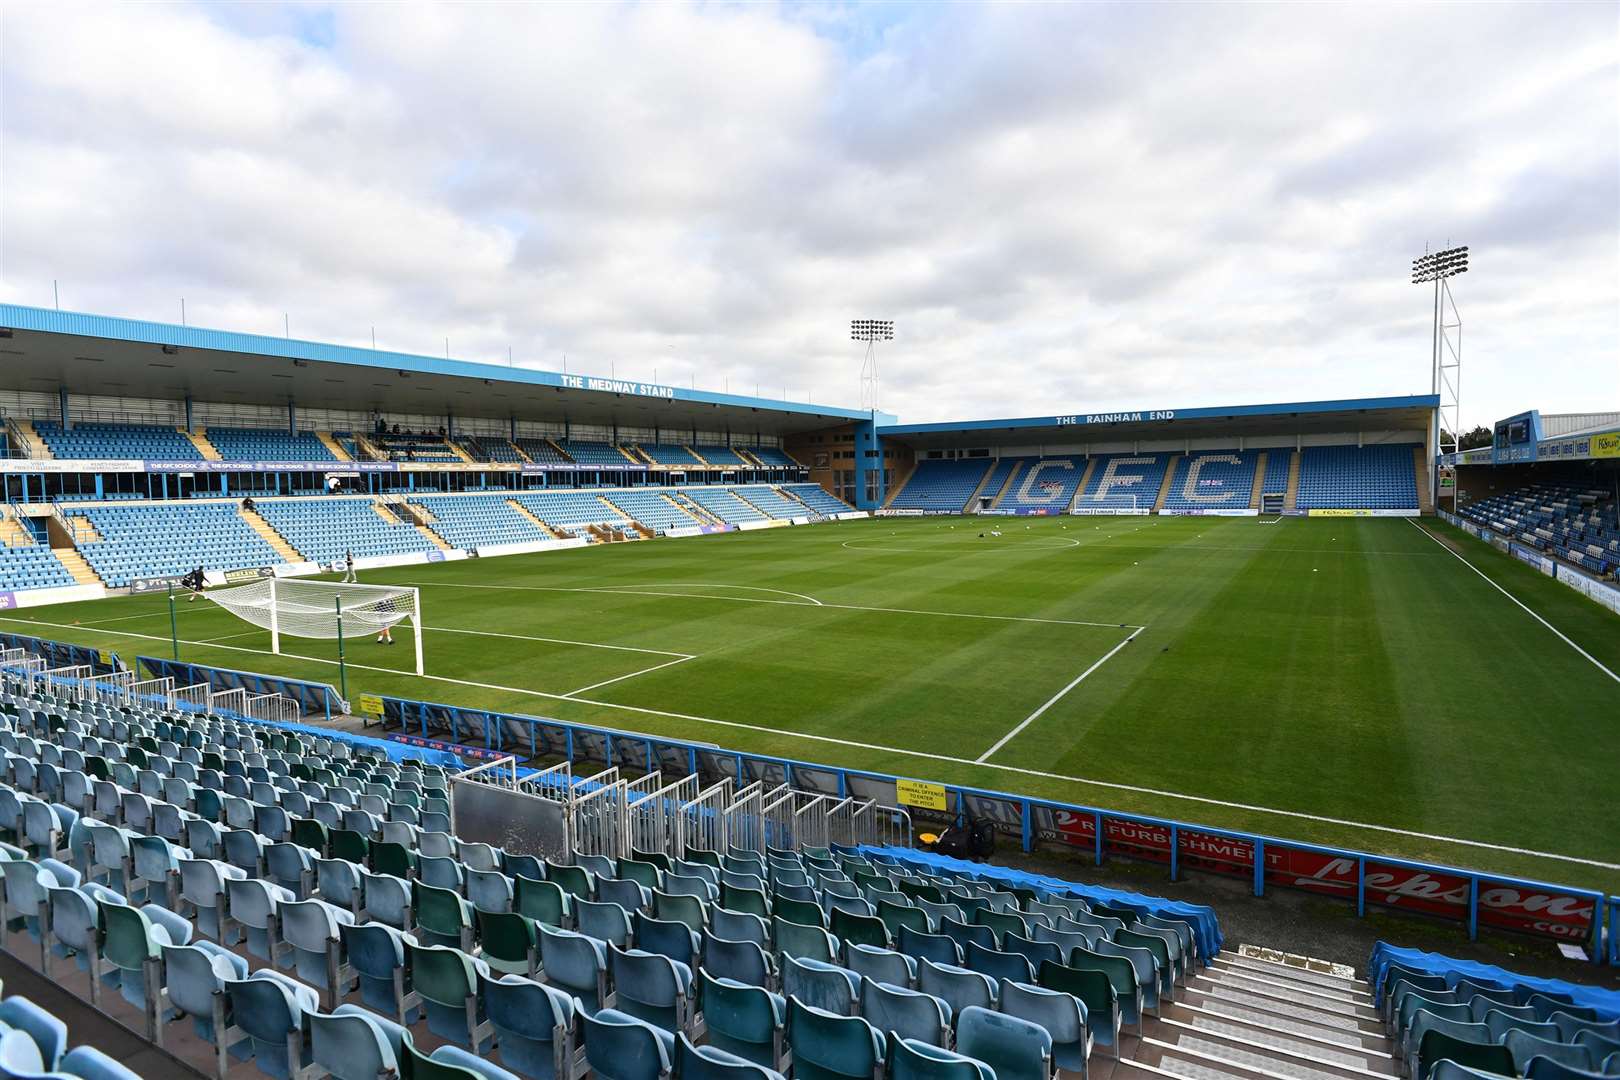 Jim first visited Priestfield as an eight-year-old in 1989